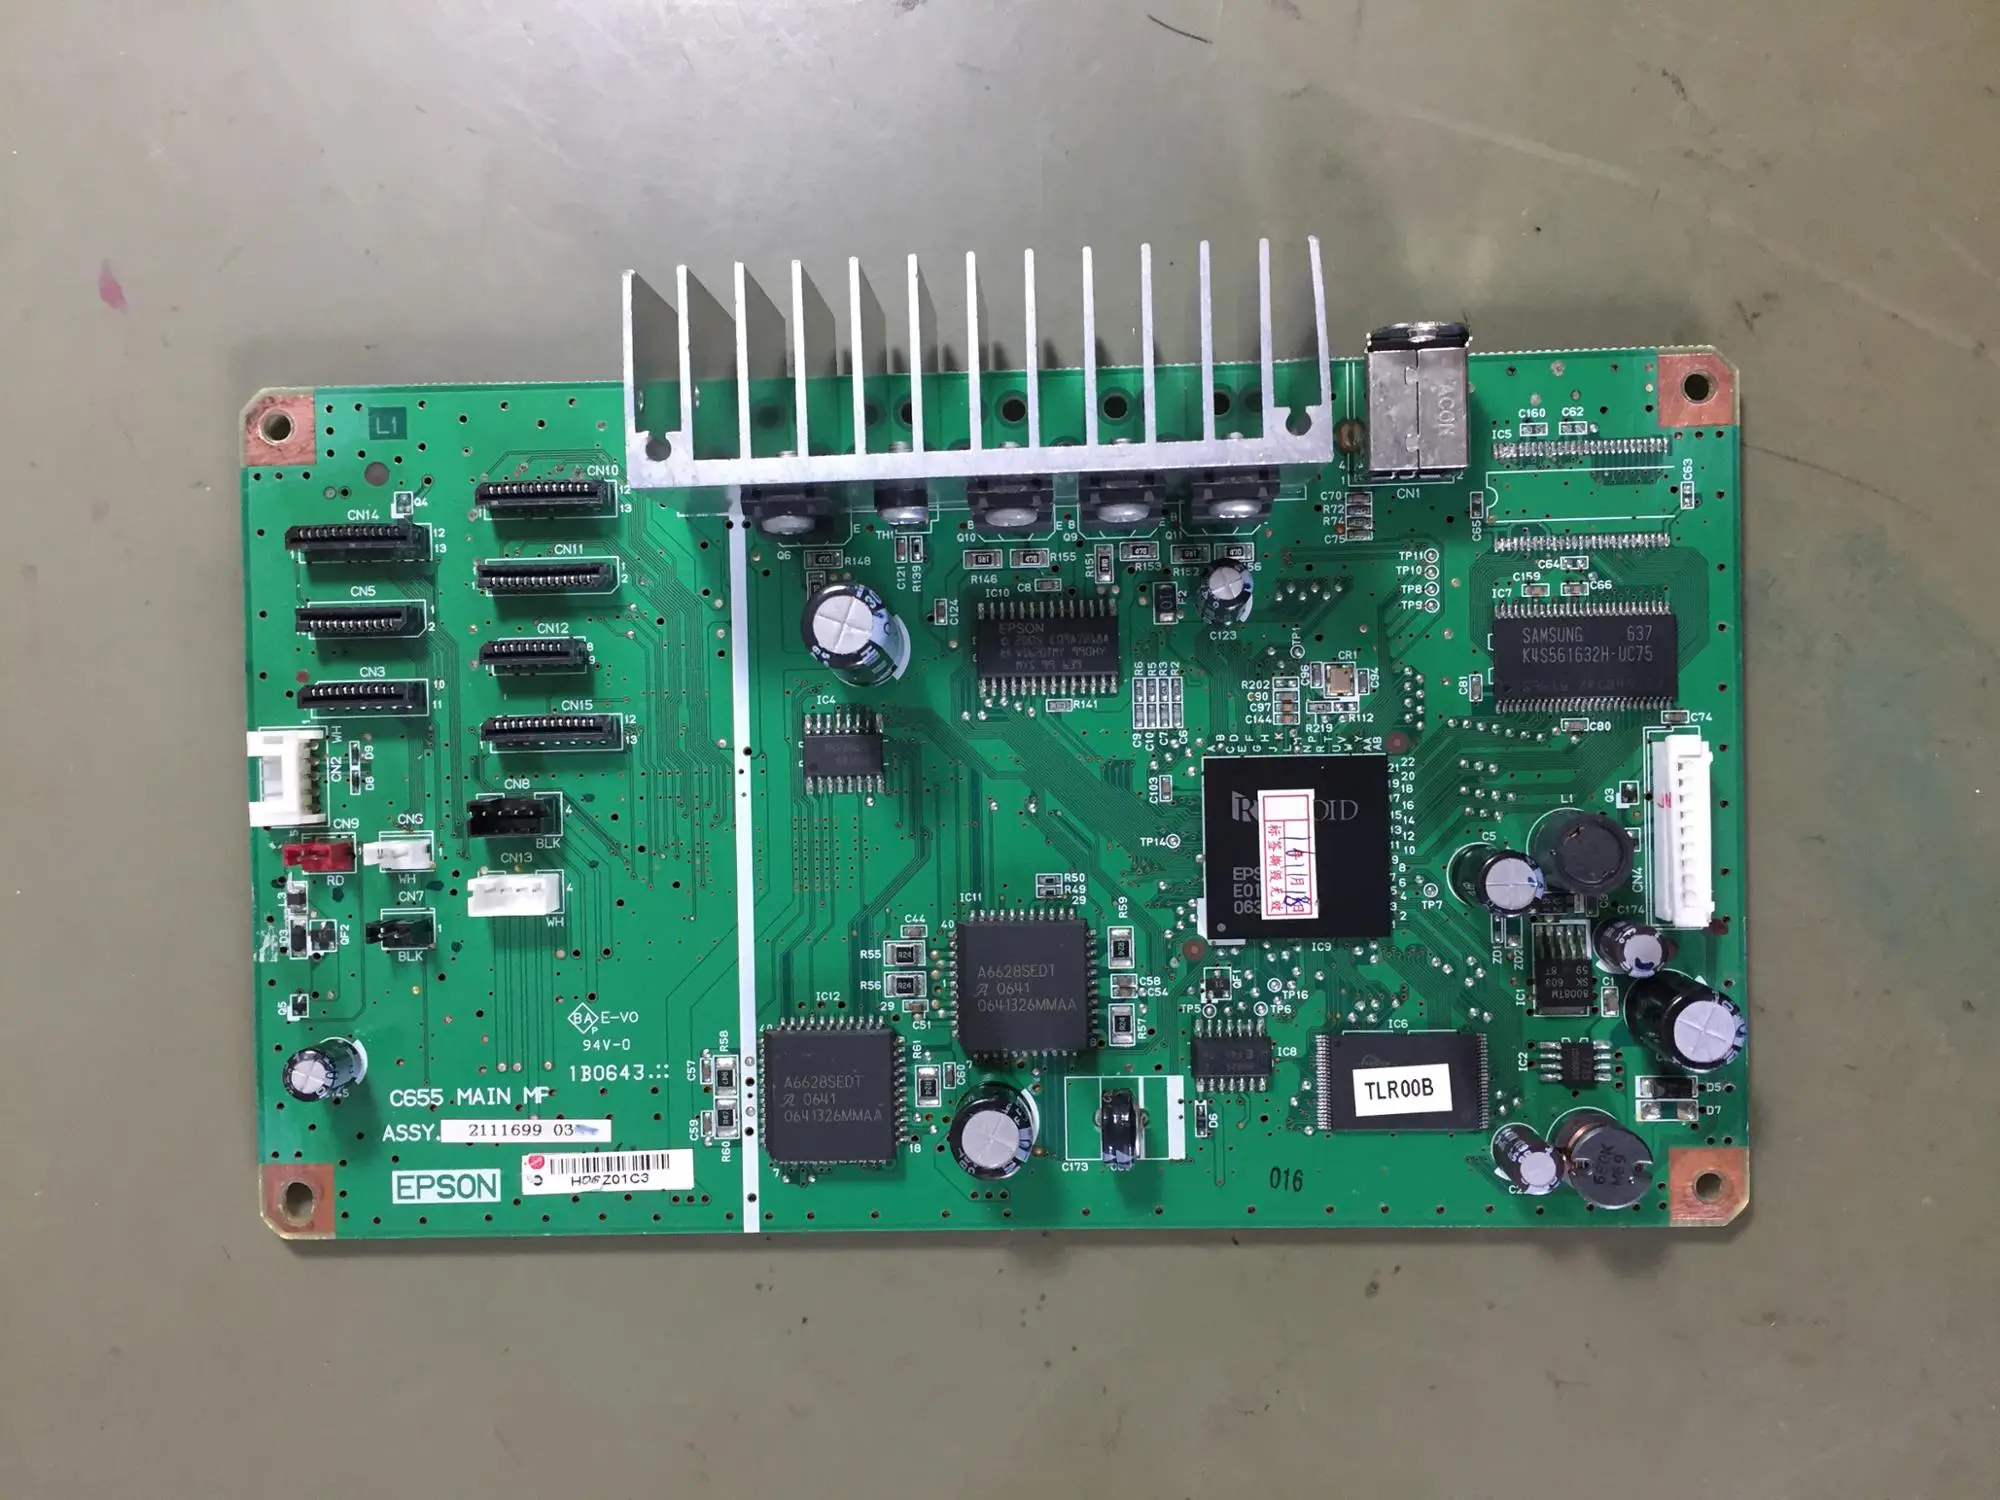 adelig pengeoverførsel råolie Genuine Printer Motherboard For Epson 1430 Mainboard New And Original  Wholesale - Buy For Epson 1430 Mainboard,1390 Mainboard,1430 Mainboard  Product on Alibaba.com